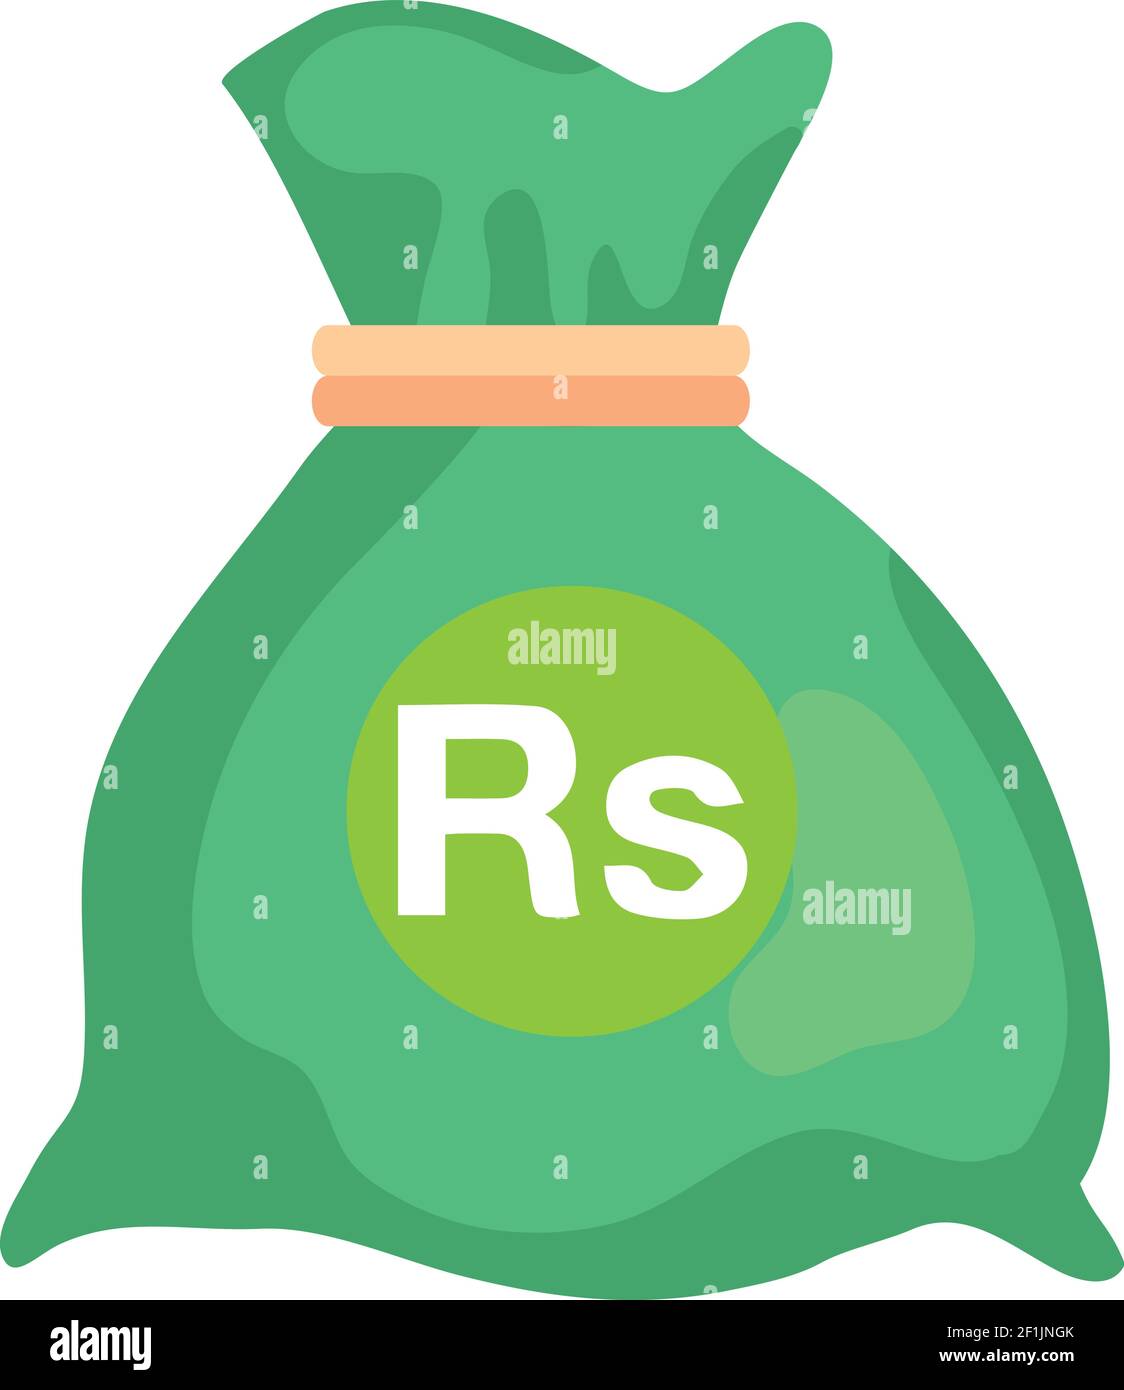 Pakistani Currency Note Bag icon in Green color for Apps and Websites, PKR Bag Sign, Pak Rupee Bag,Pakistani Note Bag icon, RS  Sign, Note in Green, Stock Vector